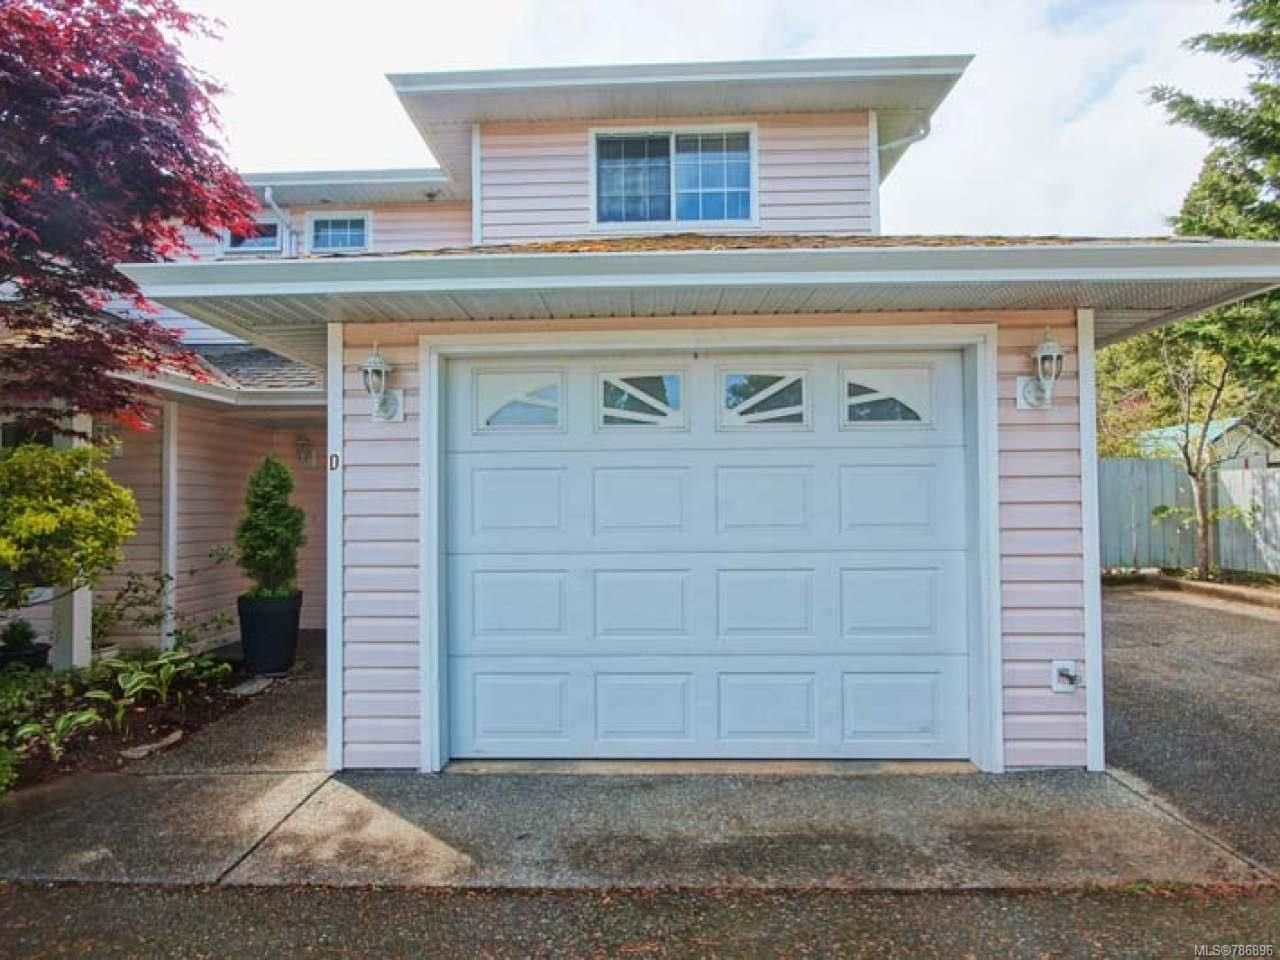 Photo 23: Photos: D 249 CORFIELD STREET in PARKSVILLE: PQ Parksville Row/Townhouse for sale (Parksville/Qualicum)  : MLS®# 786896